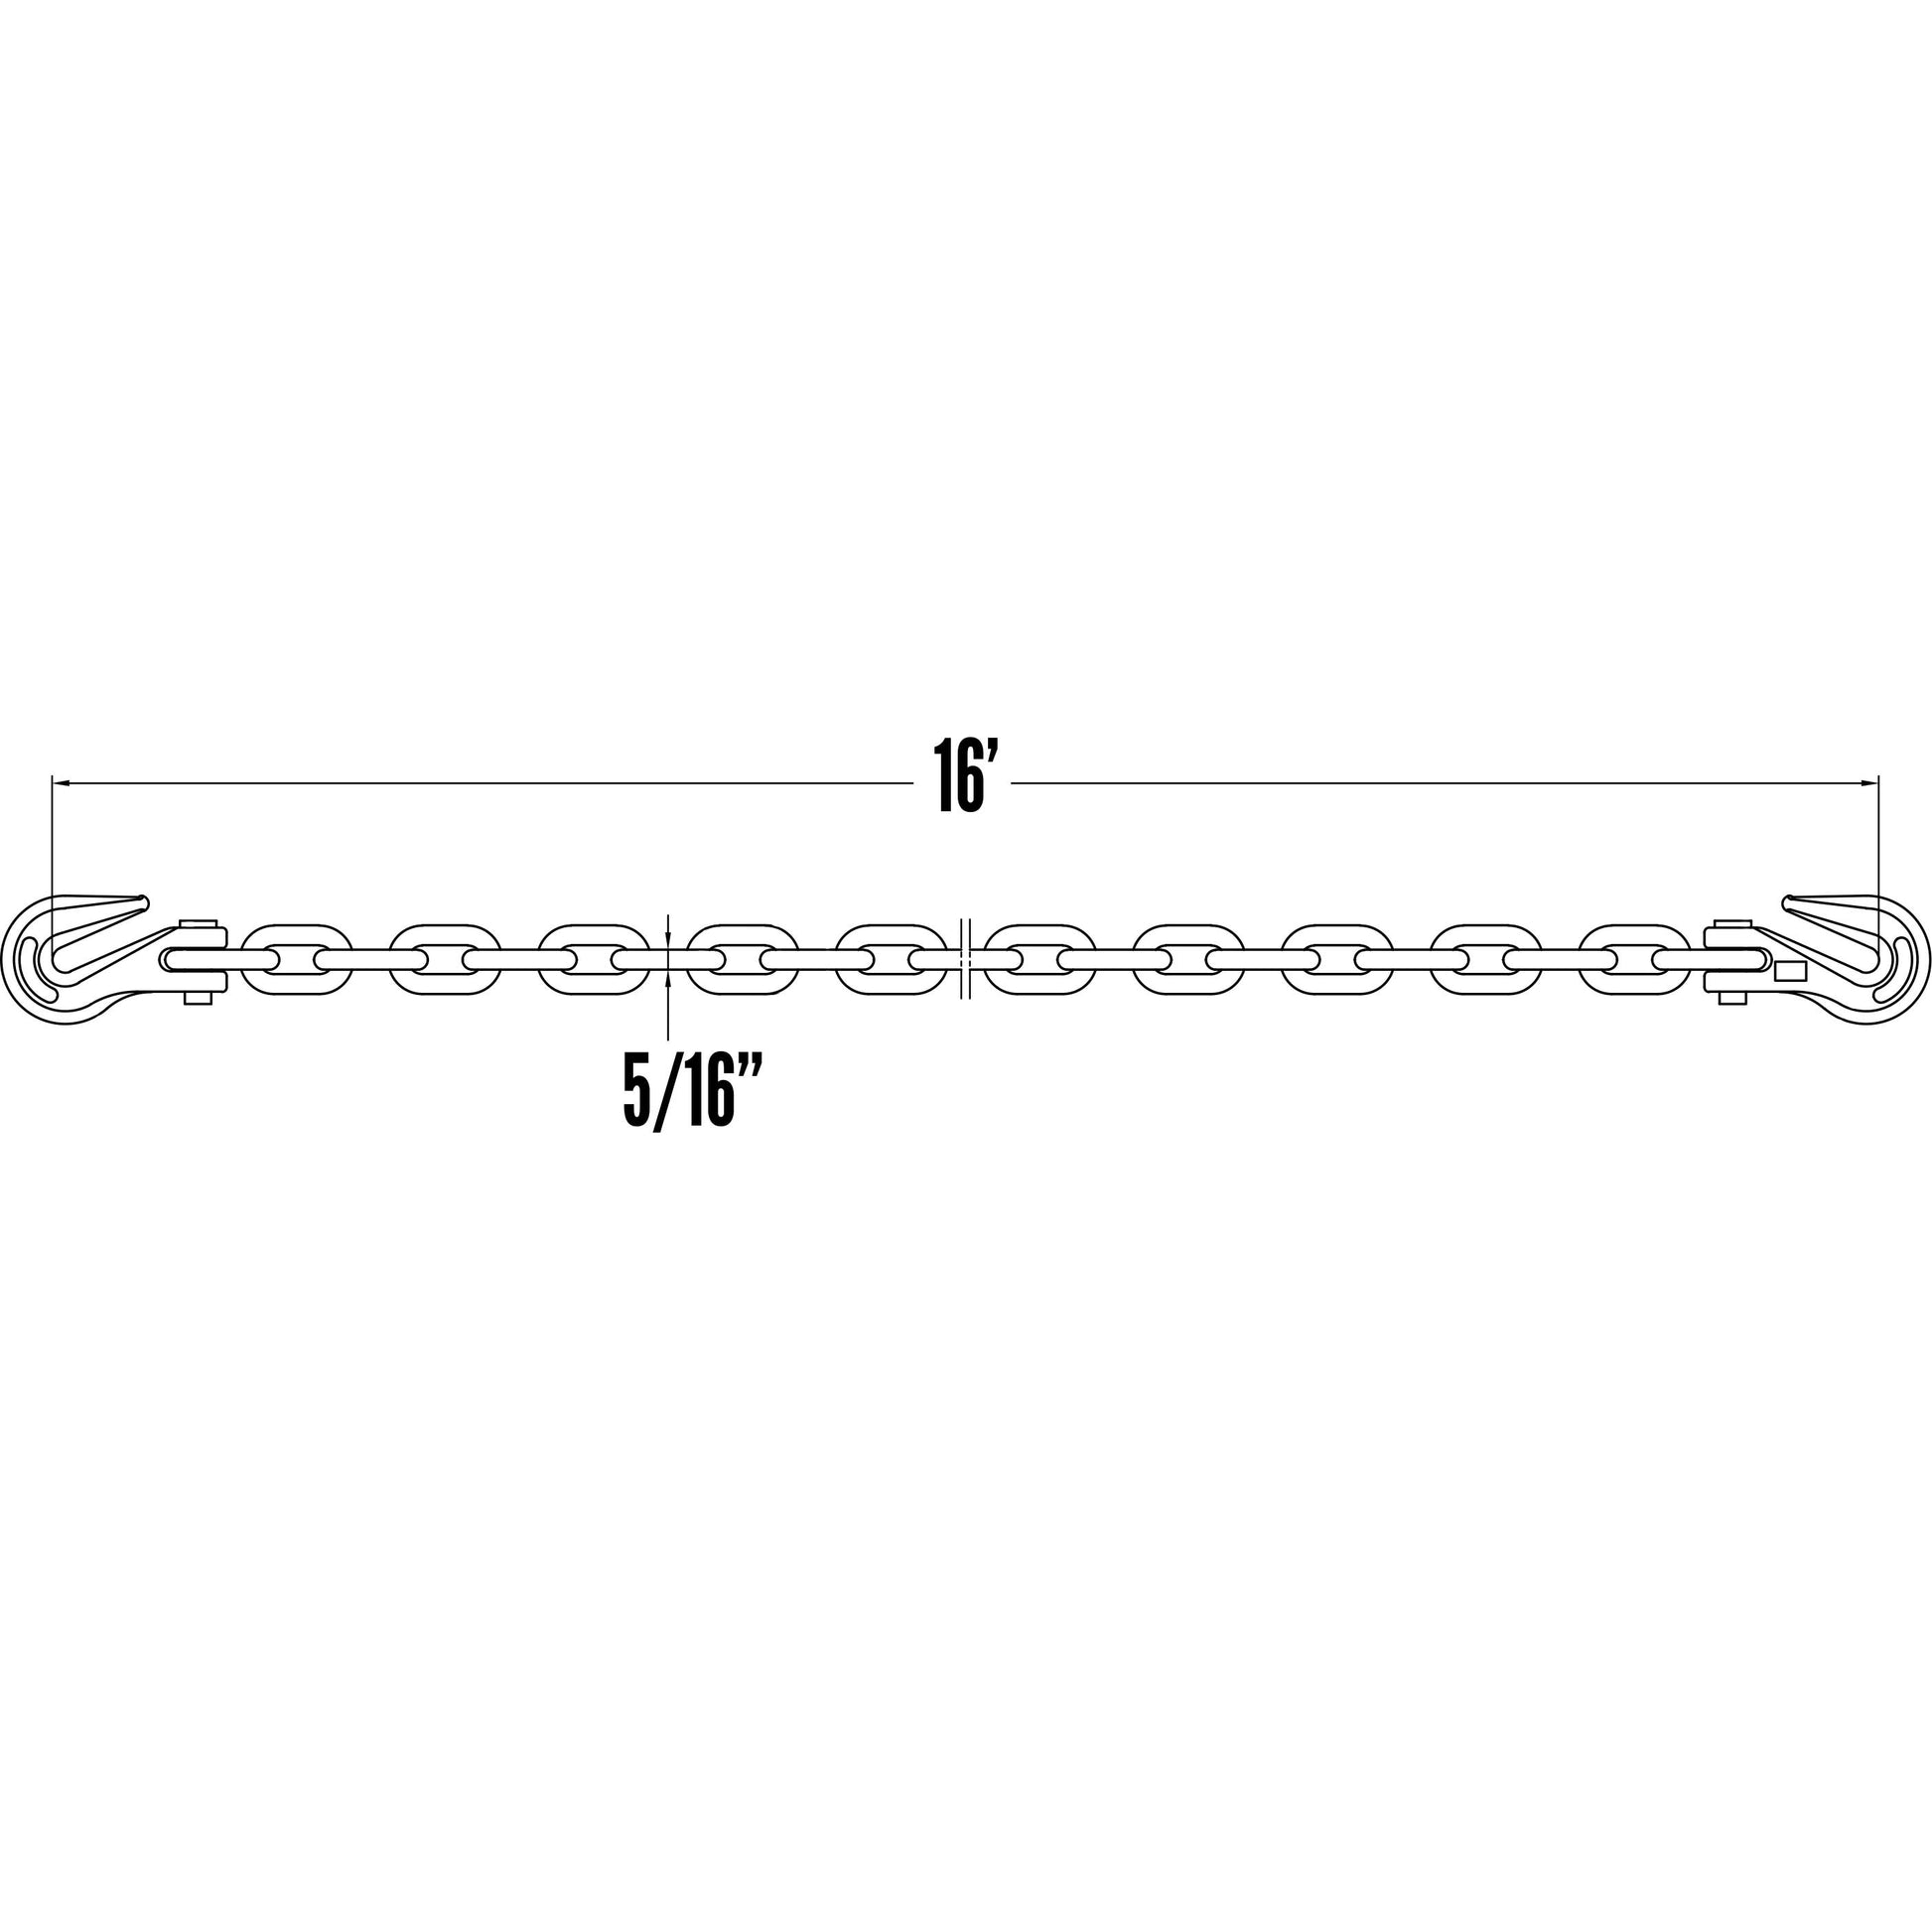 516 inch x 16 foot CM Transport Chain Grade 70 image 4 of 7